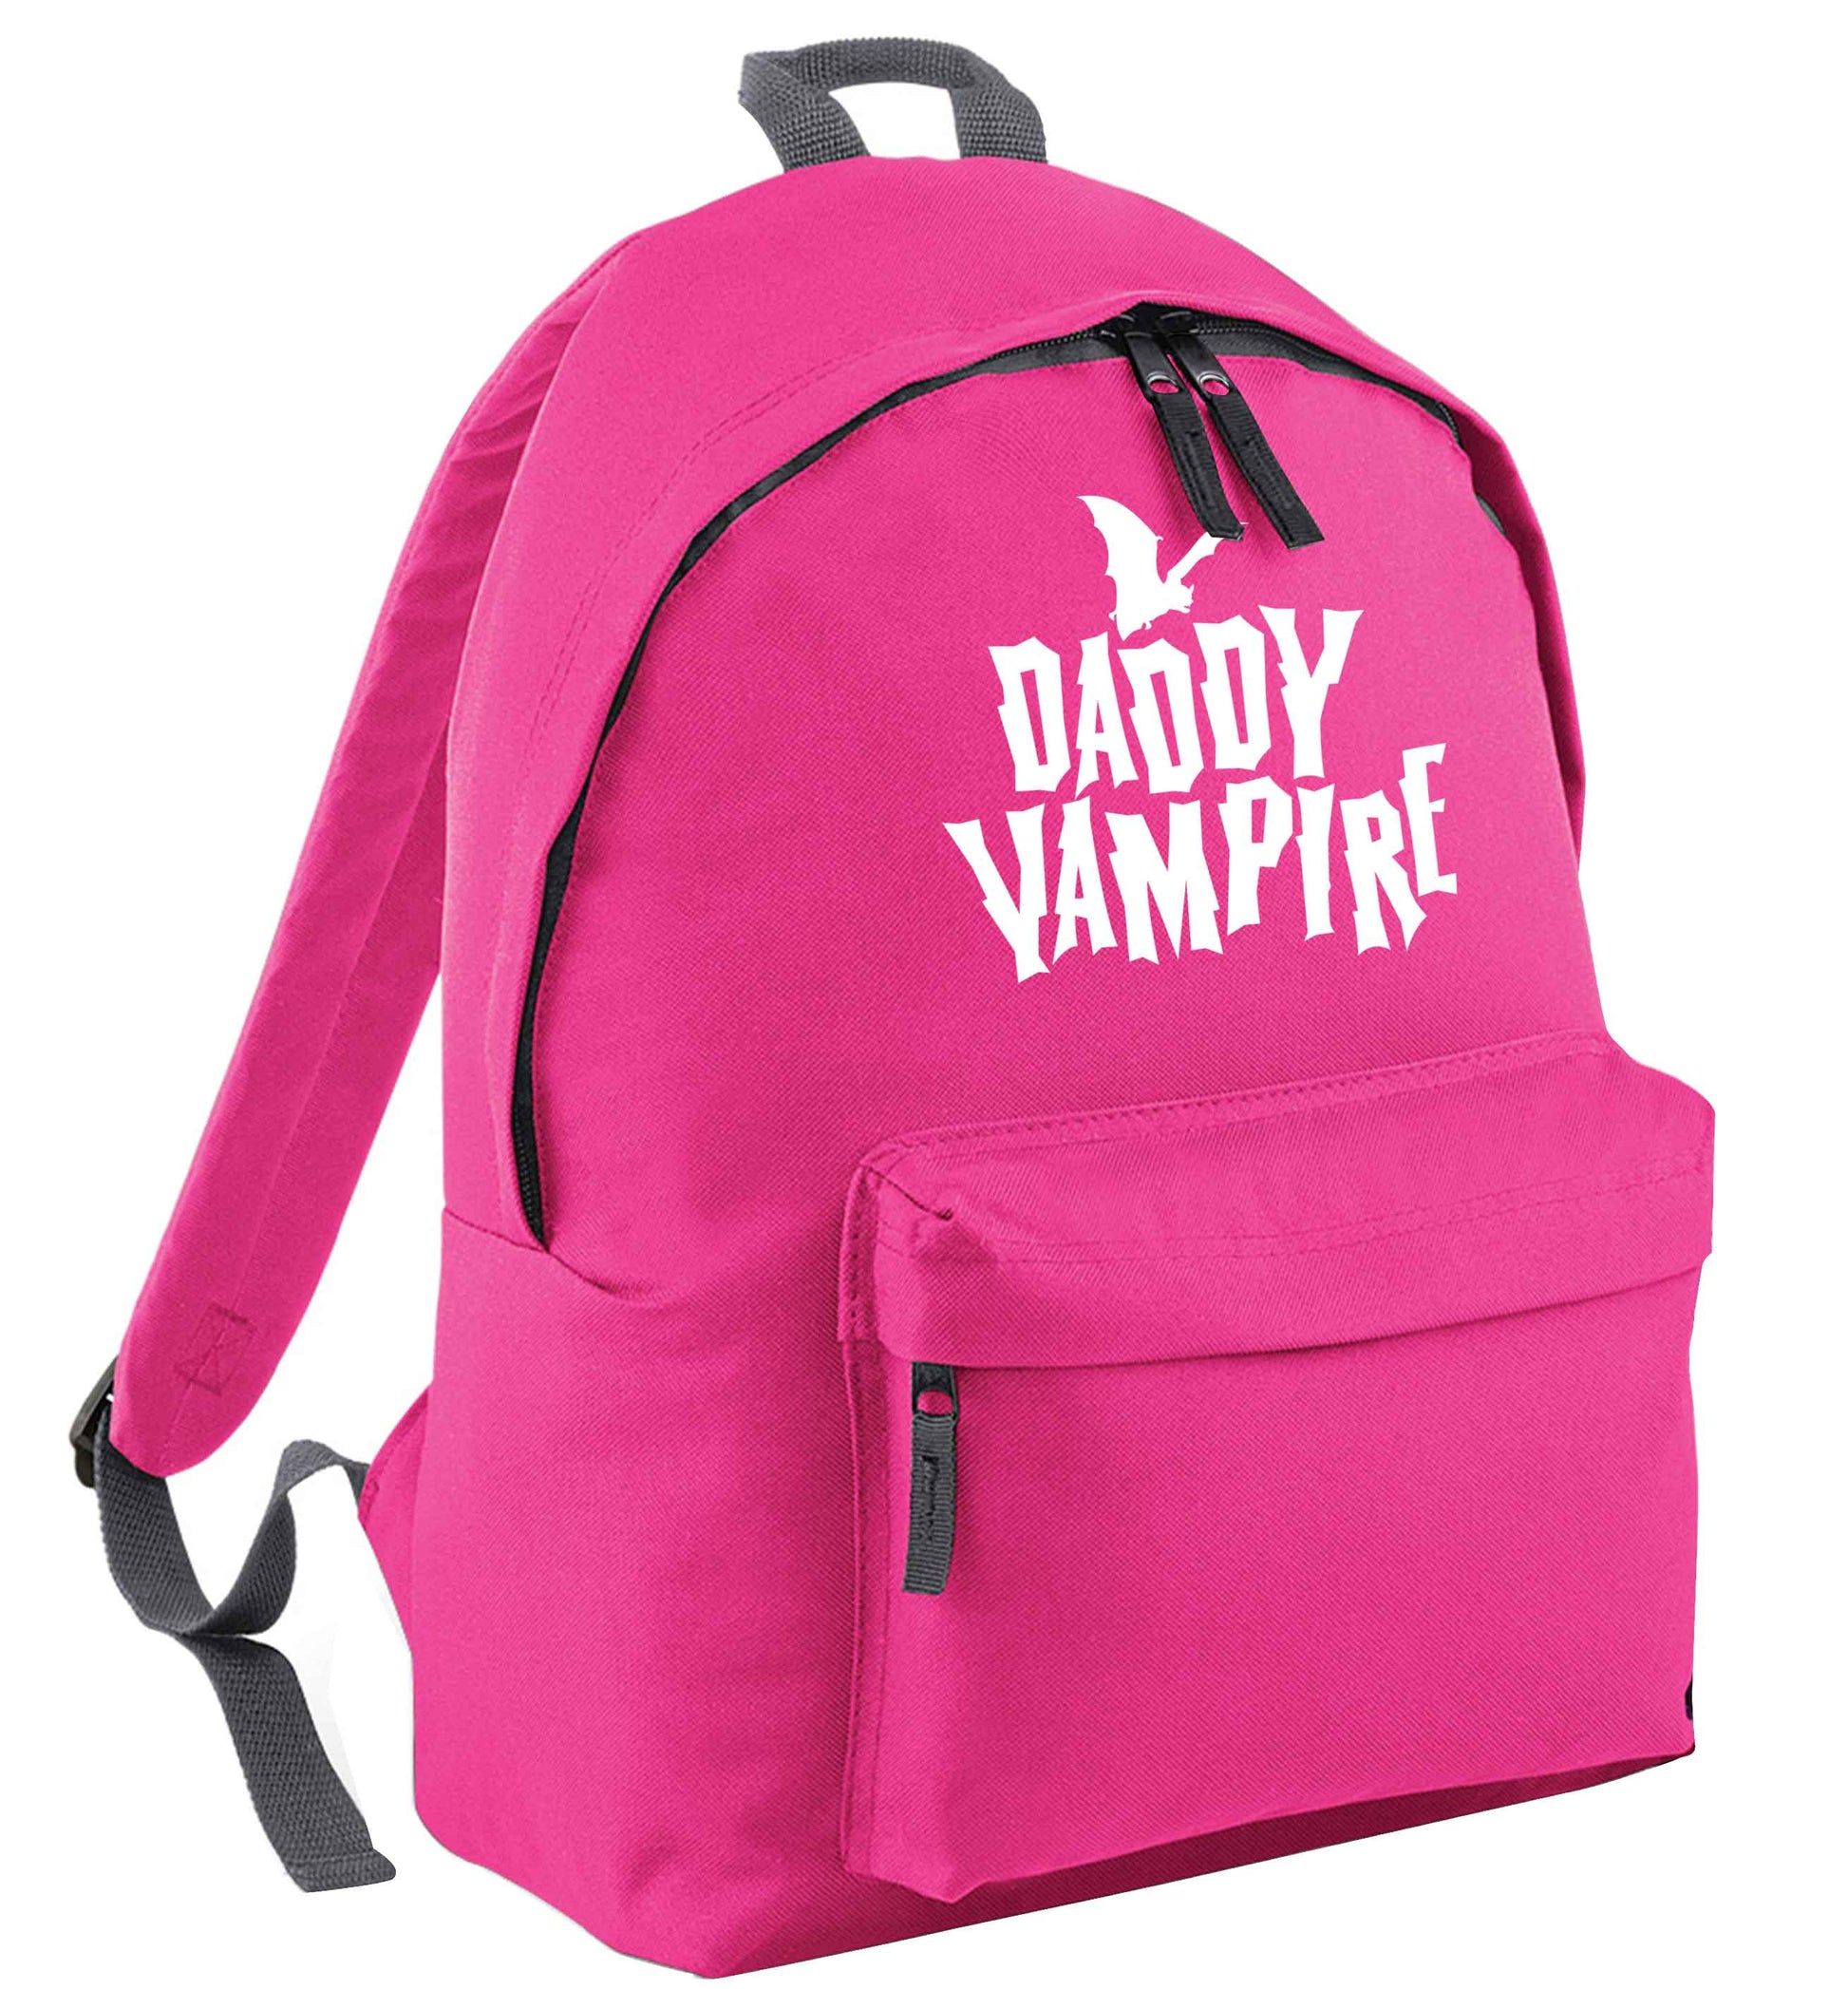 Daddy vampire pink adults backpack